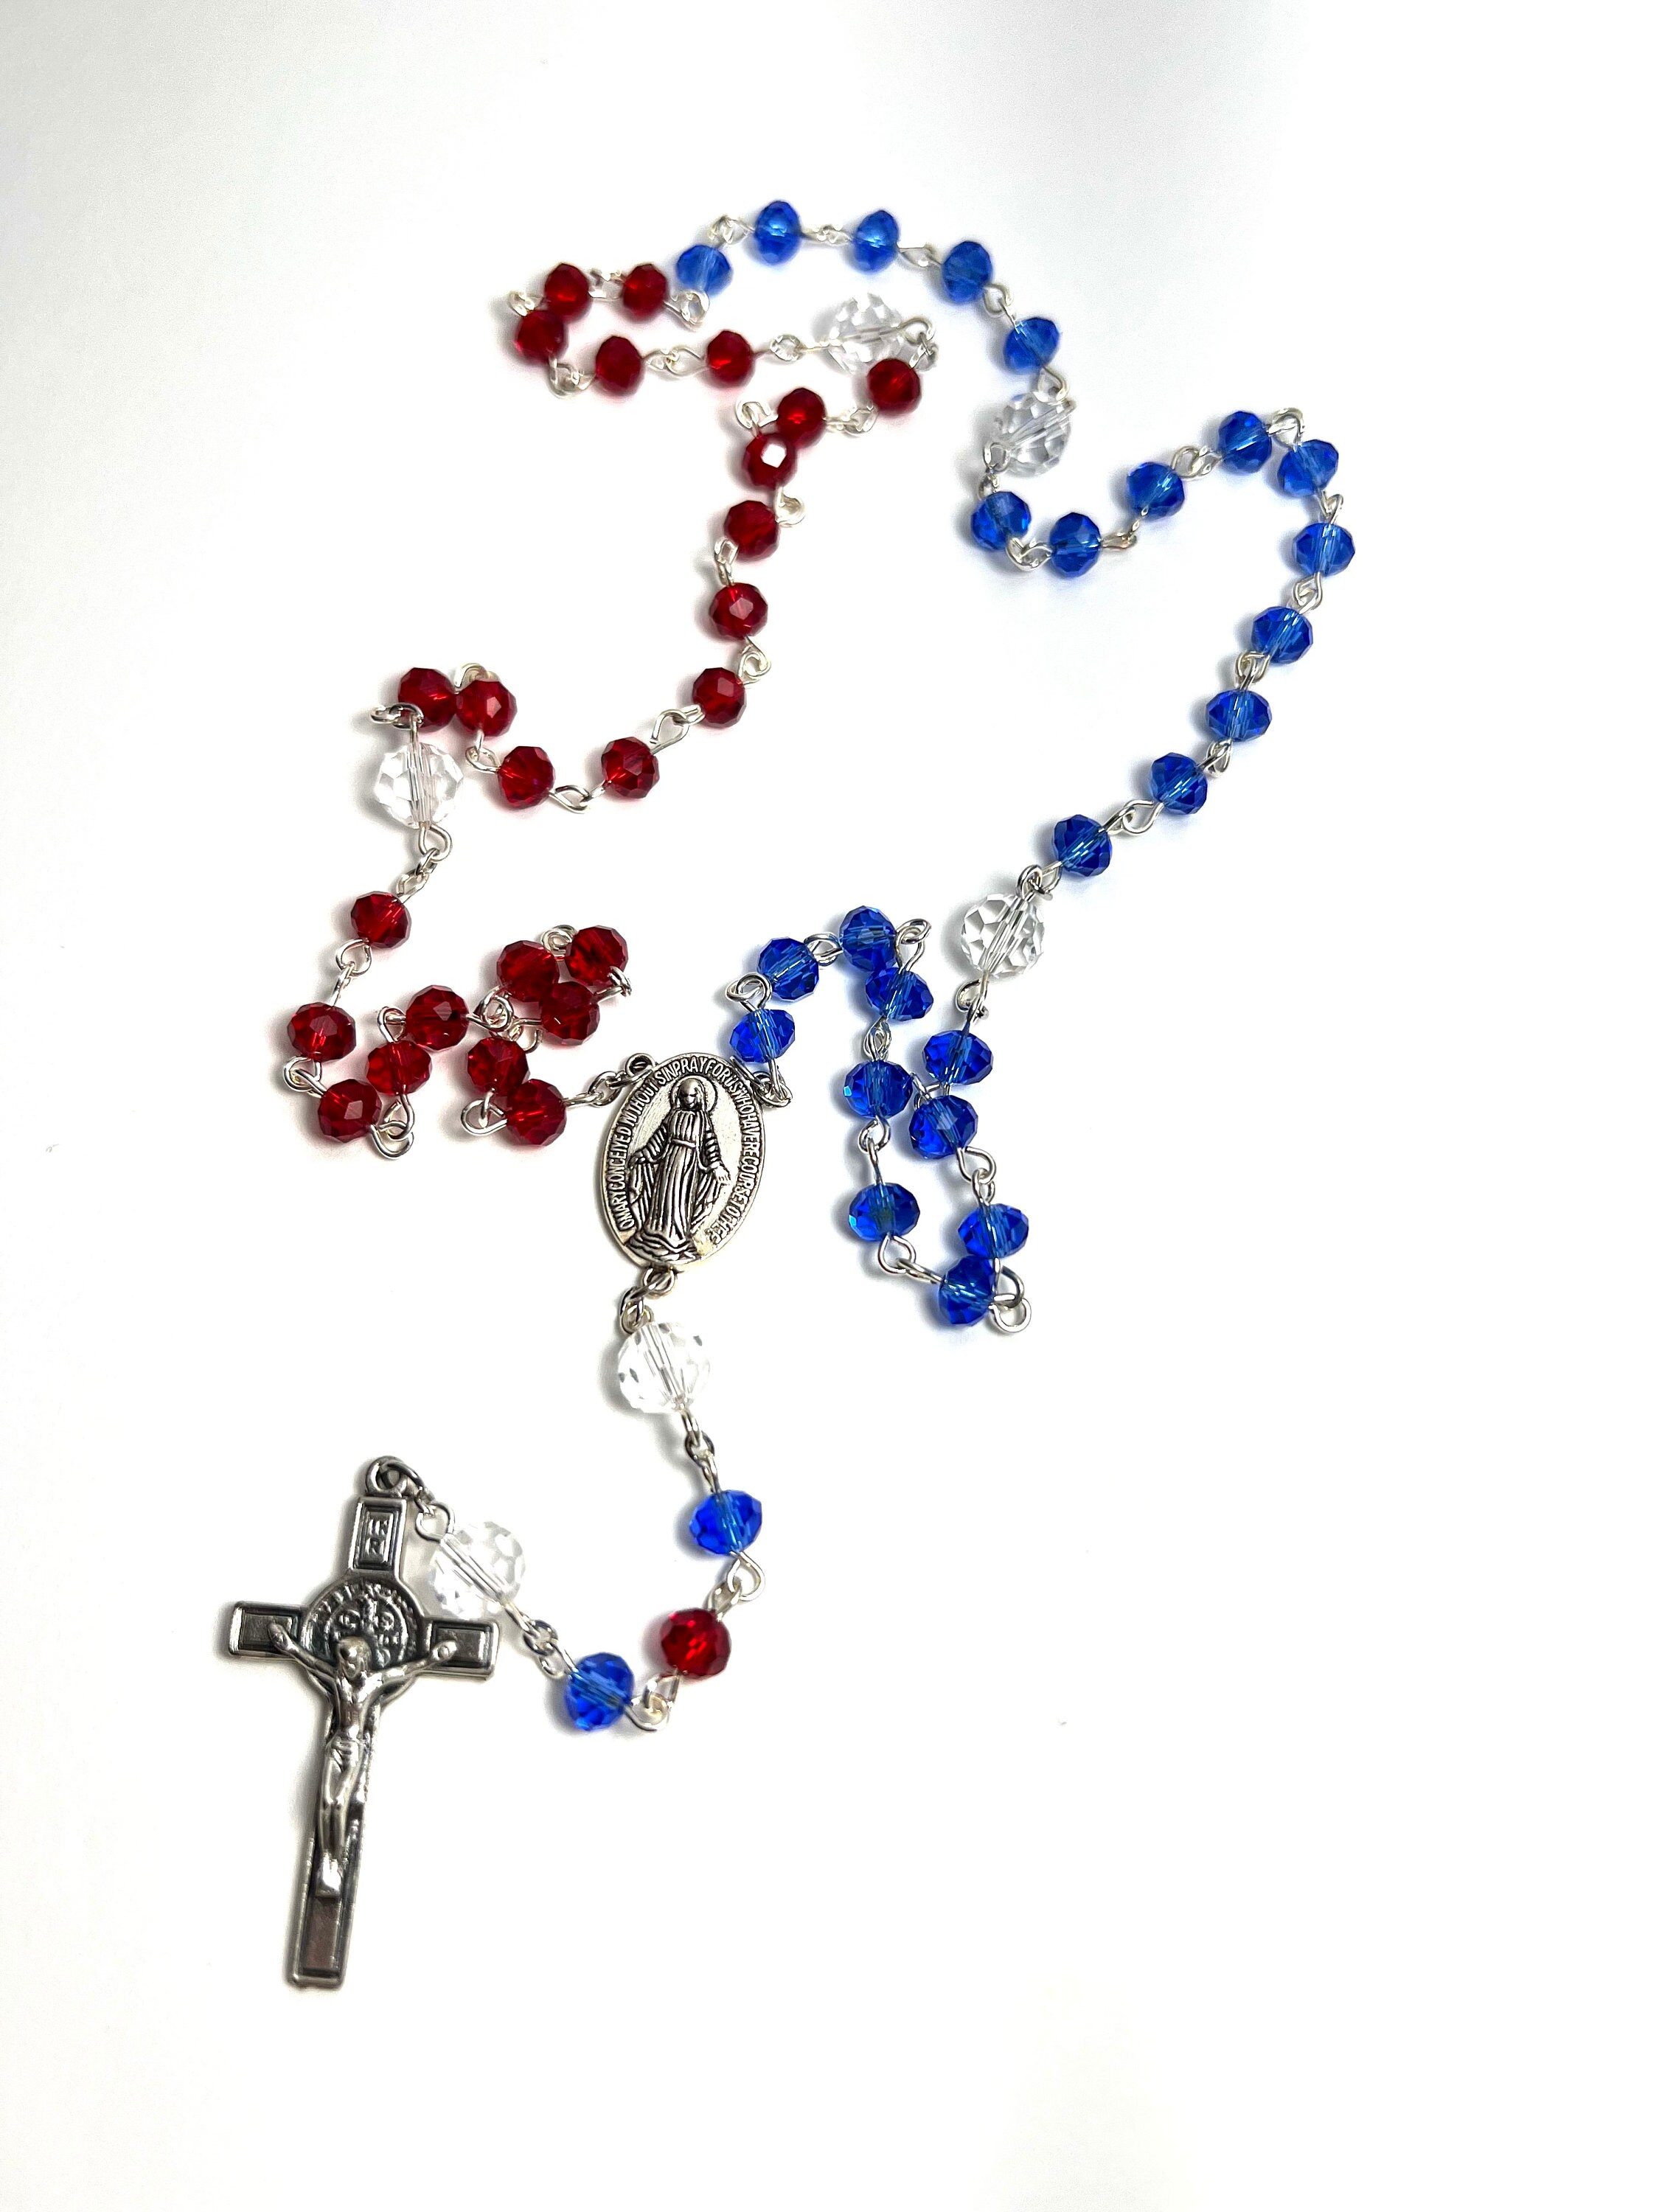 Divine Mercy rosary beads red clear round beads 5 decade 48cm 